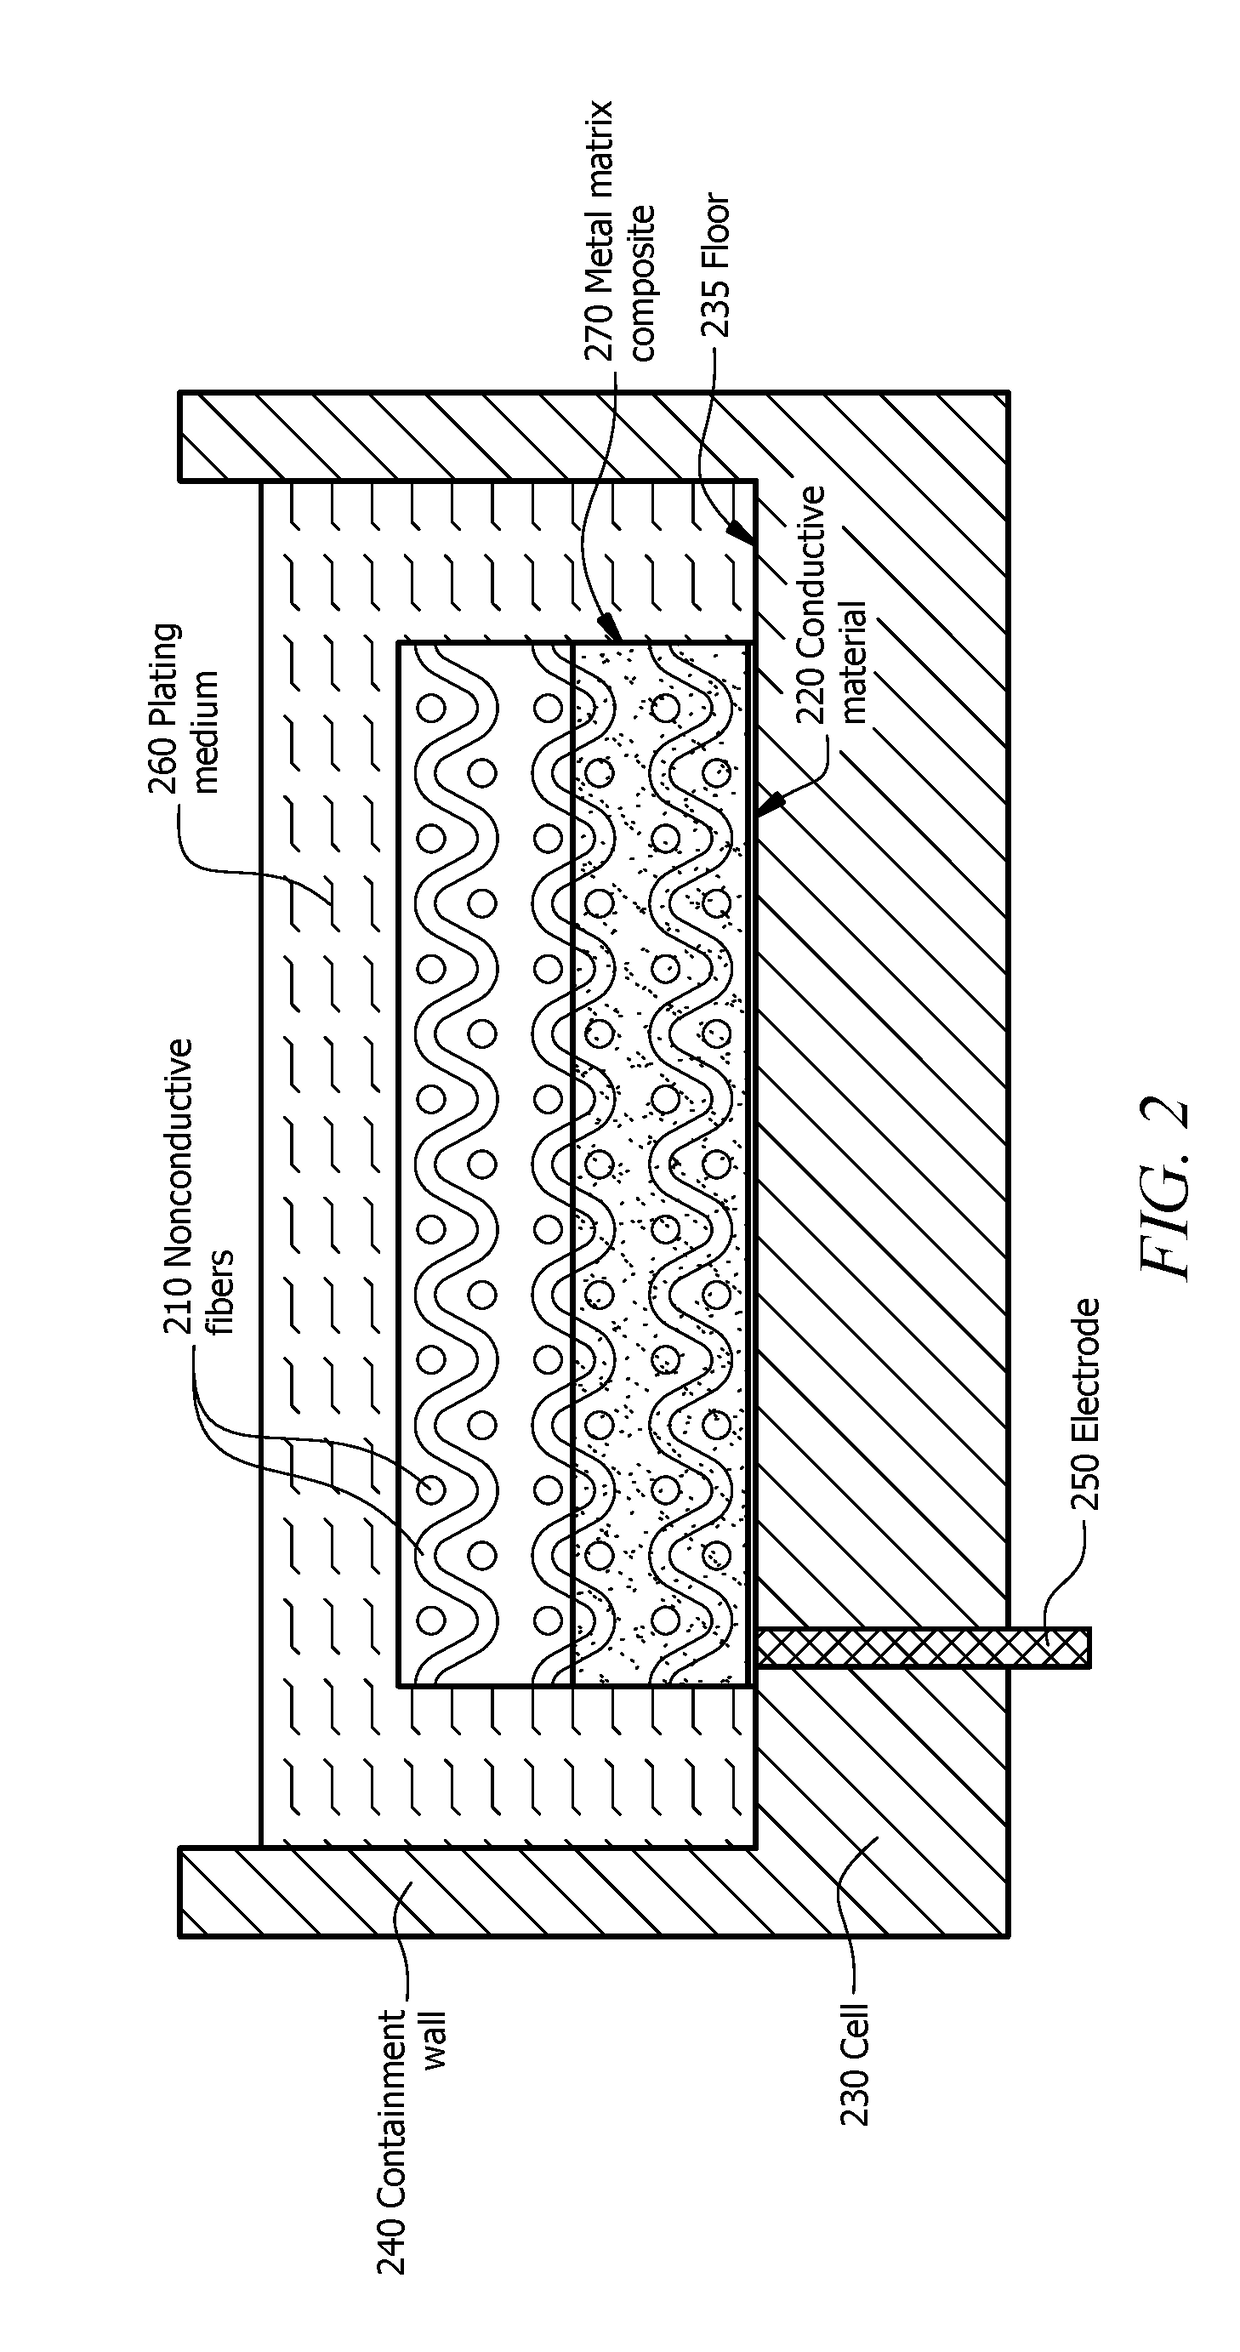 Systems and Methods for Forming Metal Matrix Composites